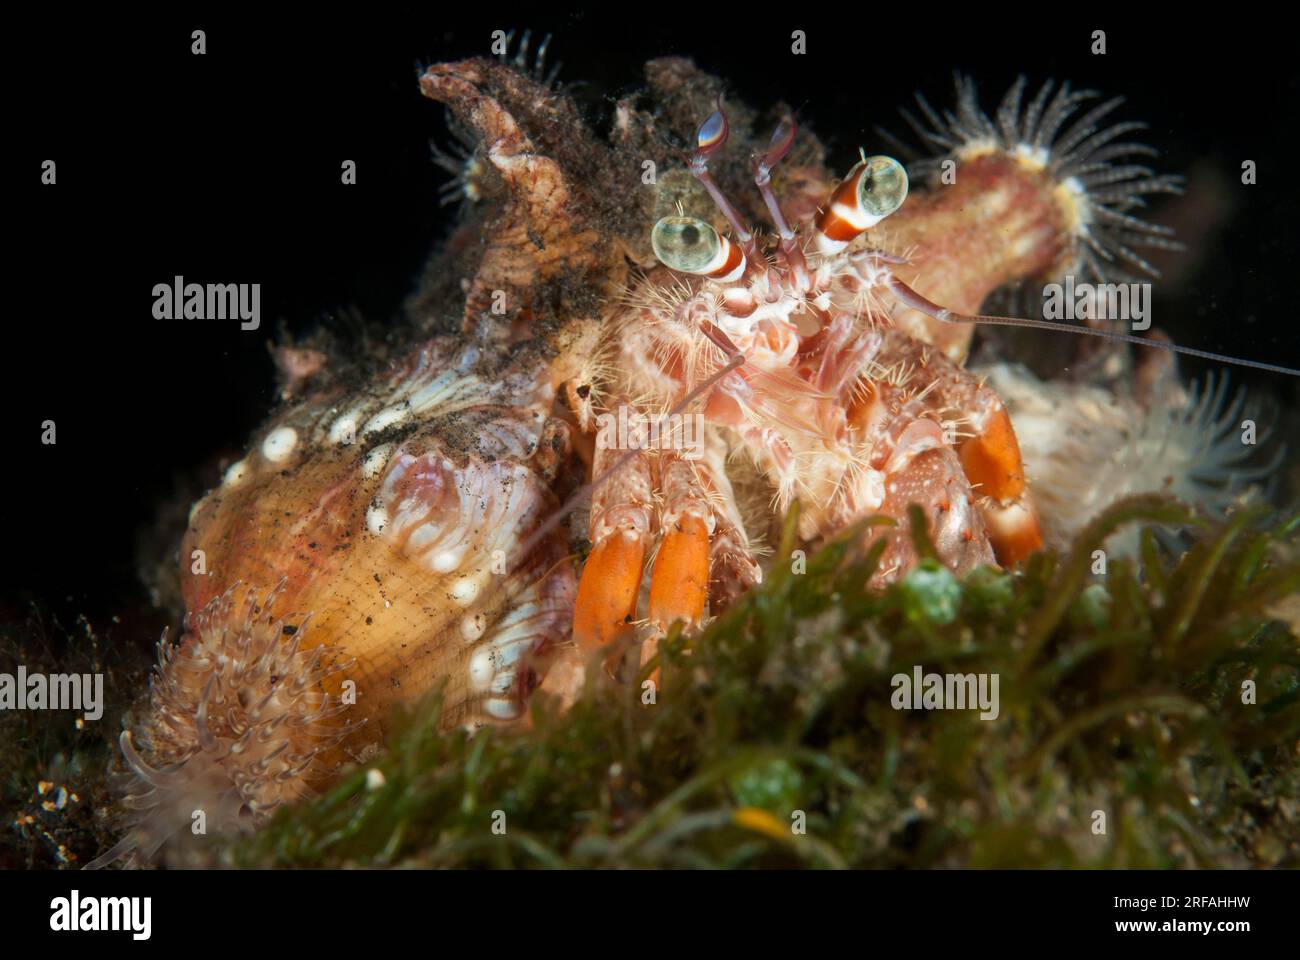 Anemone Hermit Crab, Dardanus pedunculatus, with Sea Anemones, Calliactis polypus, on shell for camouflage and protection, night dive, TK1 dive site, Stock Photo